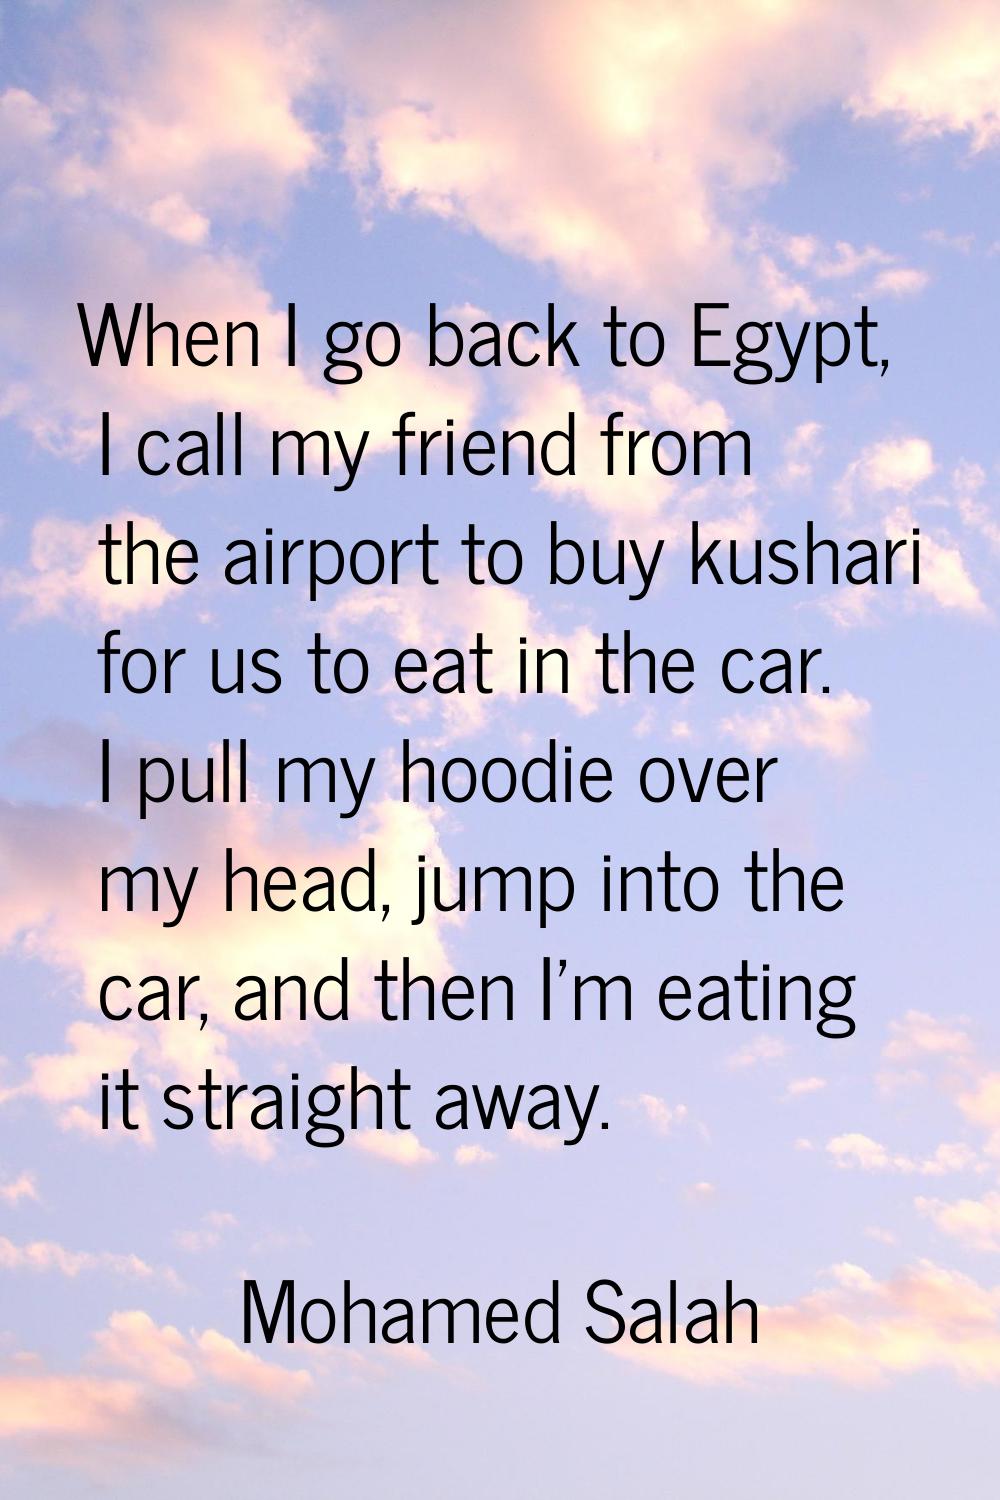 When I go back to Egypt, I call my friend from the airport to buy kushari for us to eat in the car.